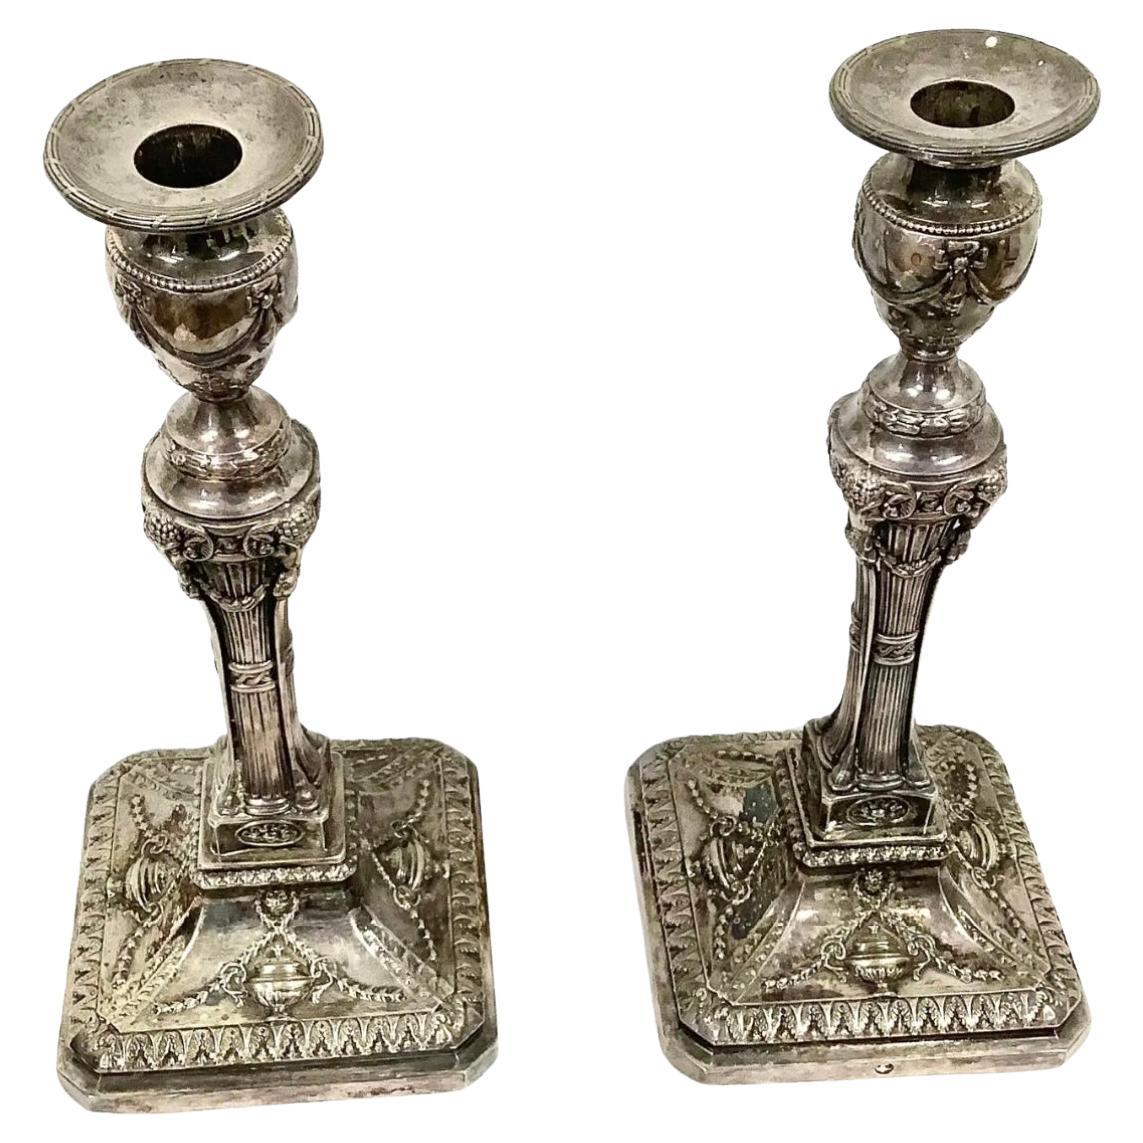 Early 19th century Georgian silver plated candlesticks. Beautiful ornate design . Very good condition.